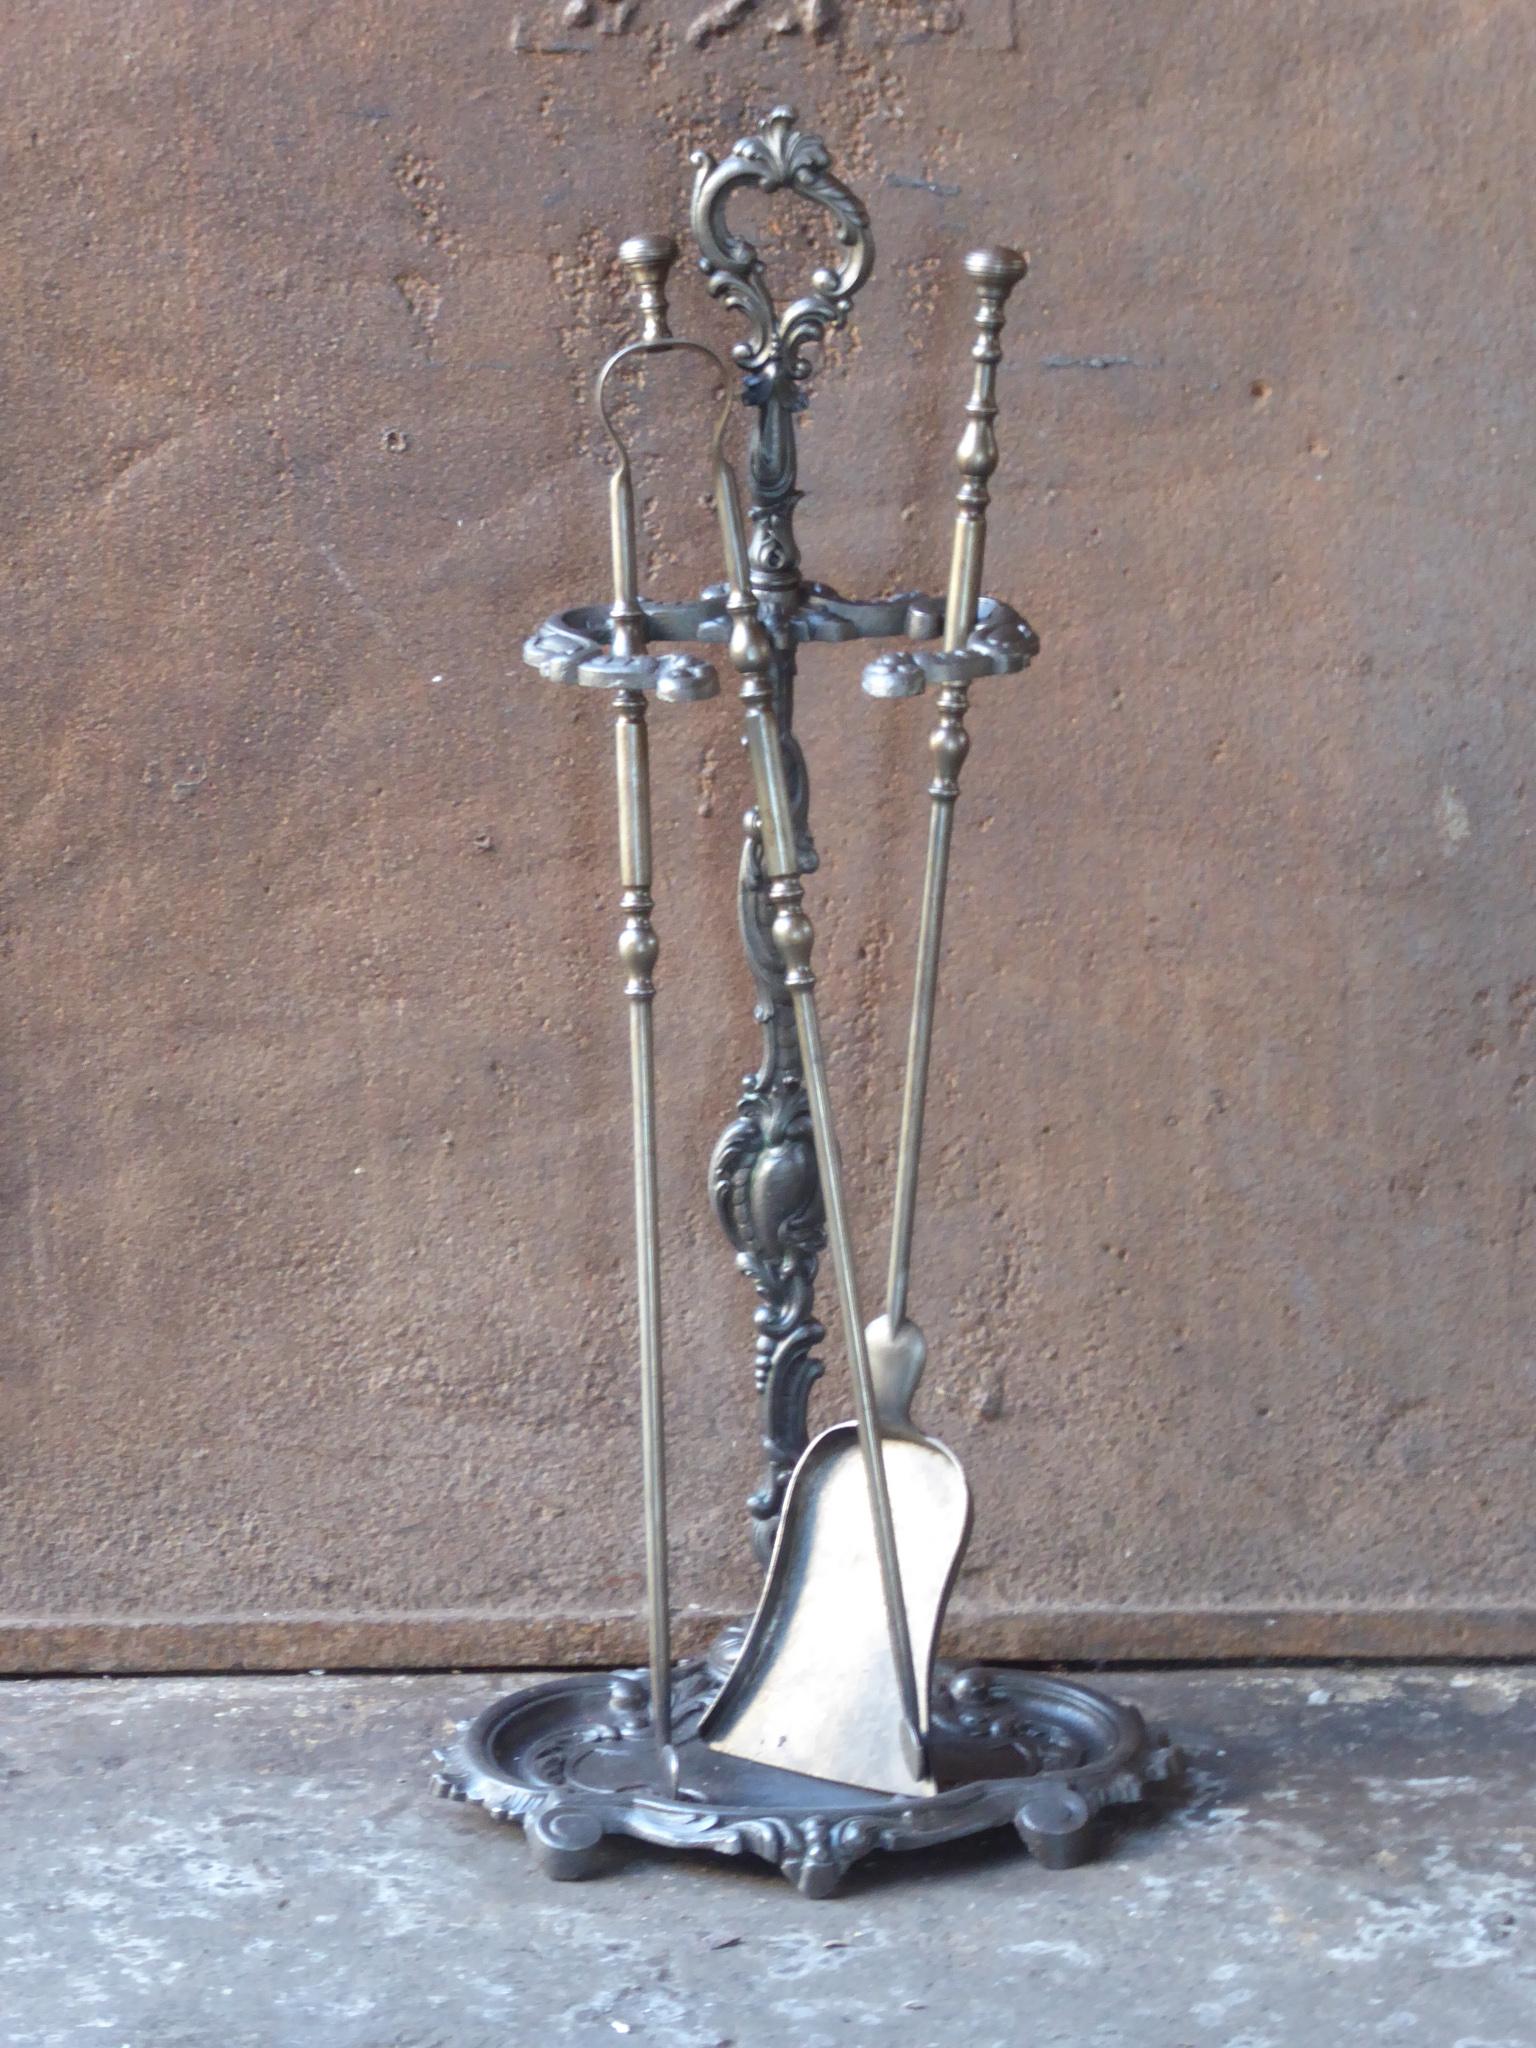 18th - 19th century English Georgian period fireplace toolset made of wrought iron and cast iron. The toolset consists of three fire irons and a stand. The condition is good.













 